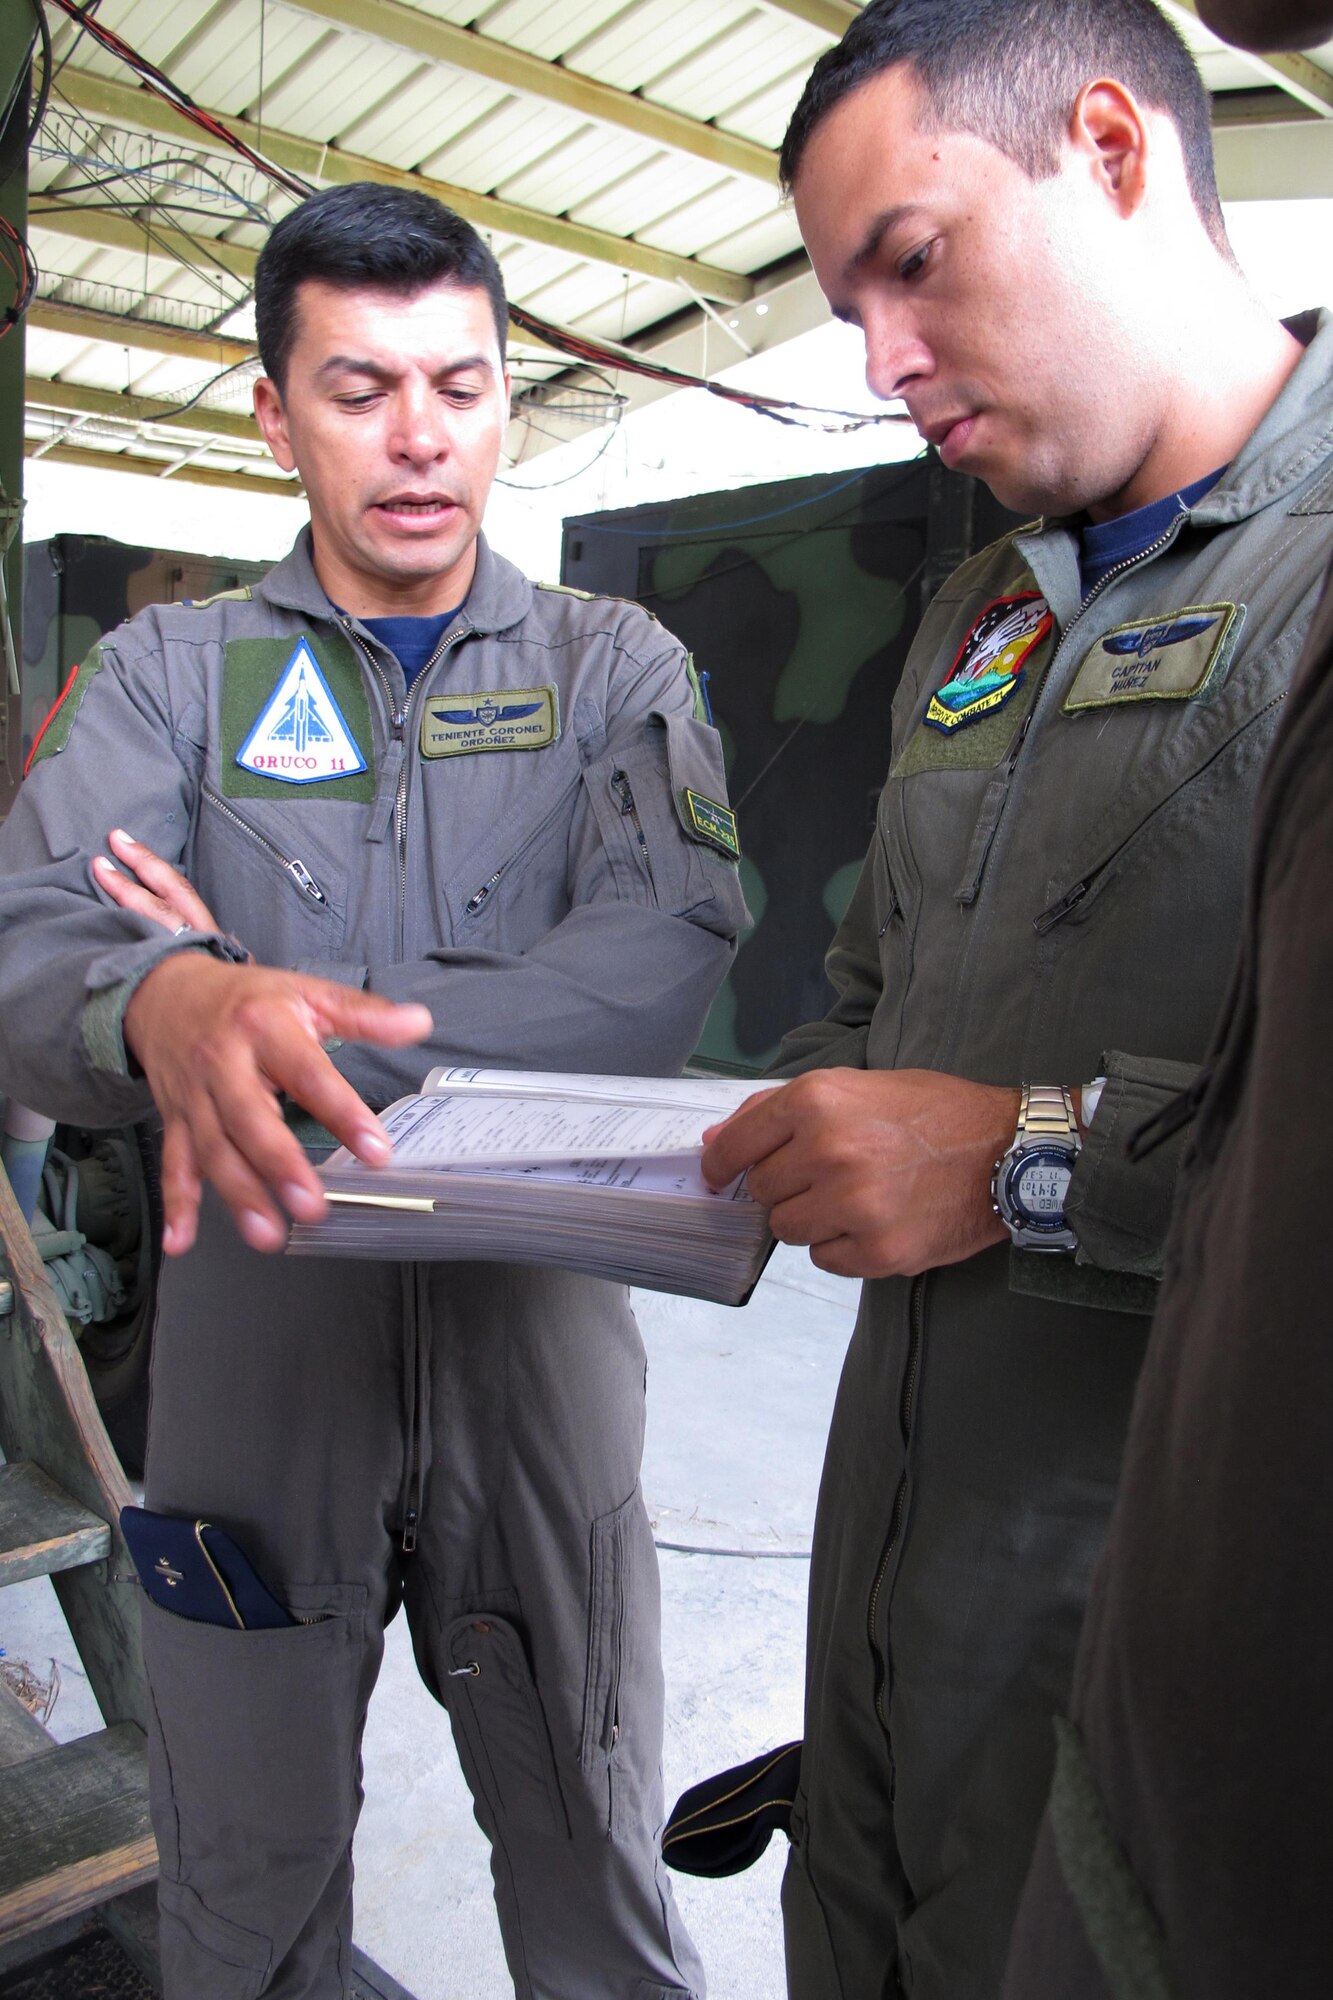 Colombian Air Force Lt. Col. Jorge Ordonez (left) and Colombian Air Force Capt, Rodrigo Nunez look over Ground Control Intercept training manuals at the Georgia Air National Guard 117th Air Control Squadron at Hunter Army Airfield in Savannah, Georgia May 30-June 2, 2017 during a State Partnership Program engagement with the South Carolina National Guard. (U.S. Air National Guard photo by Capt. Stephen D. Hudson)